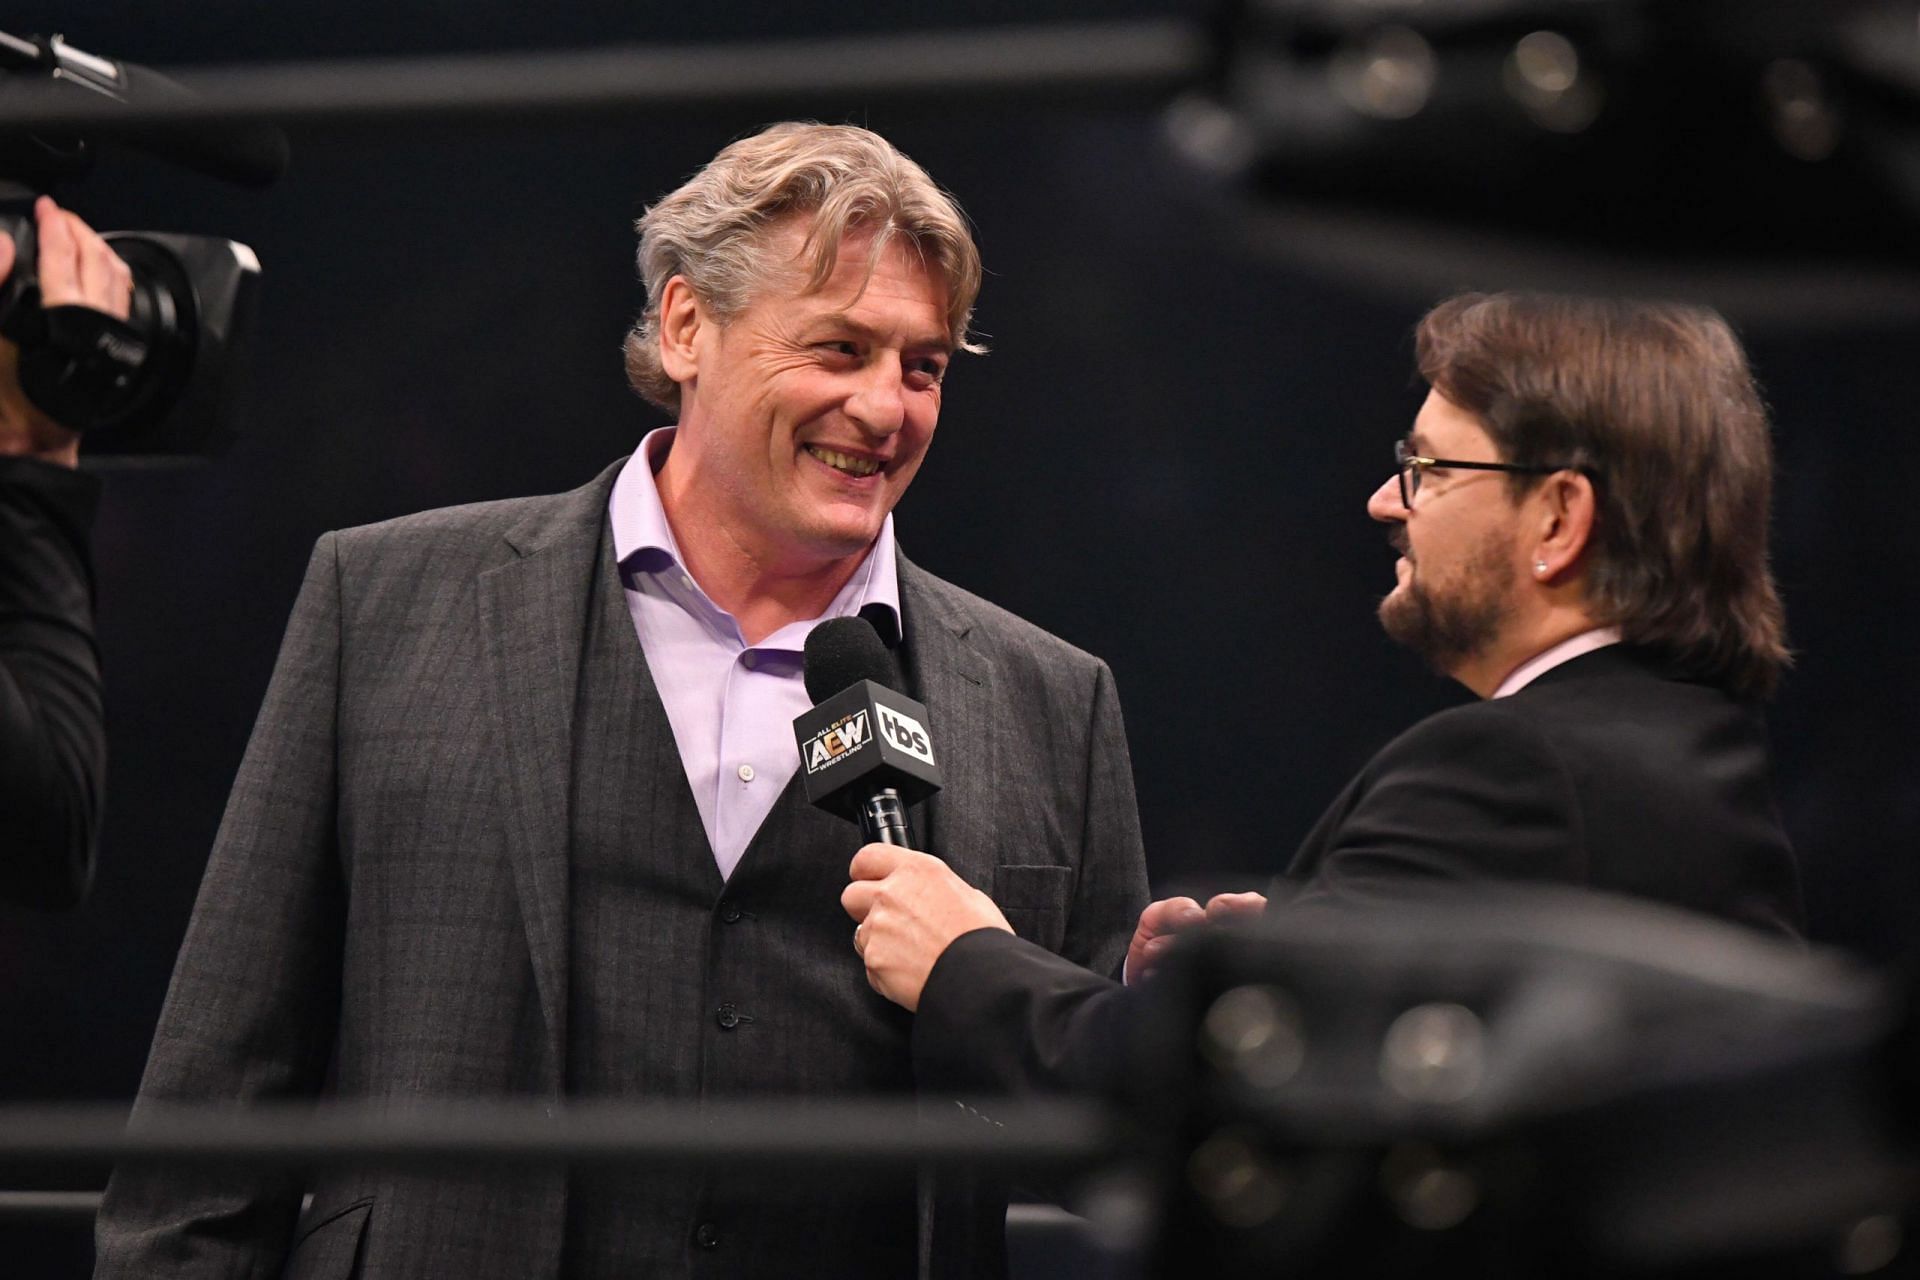 Regal during his first promo after signing with AEW.